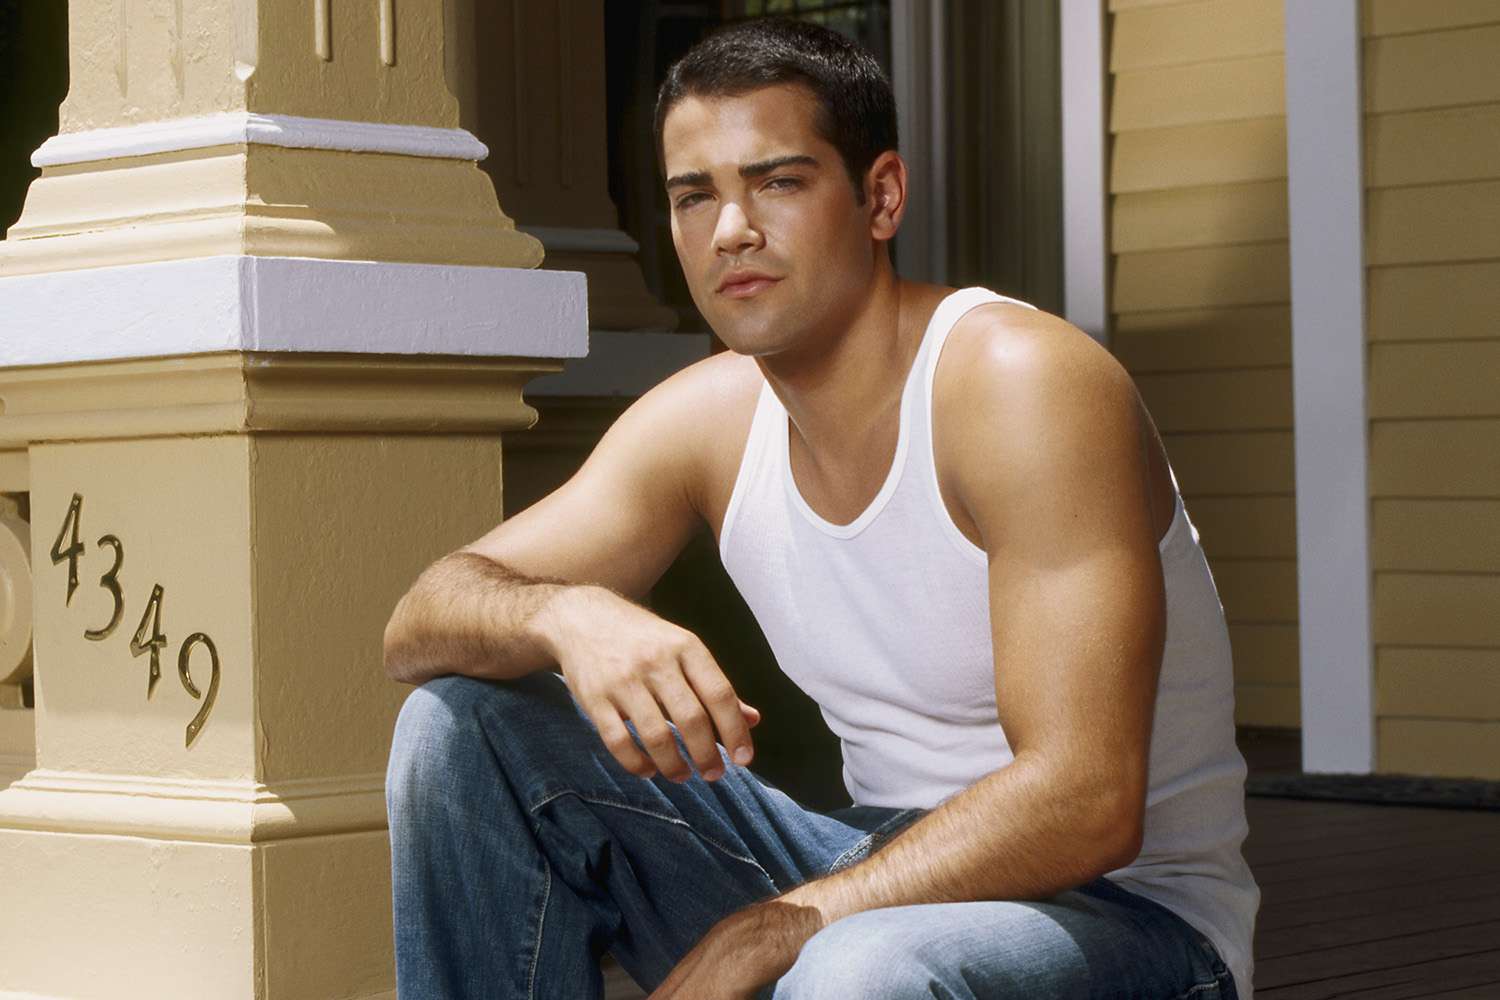 Jesse Metcalfe Says He Felt 'Pressure' to Stay Fit for Desperate Housewives Shirtless Scenes